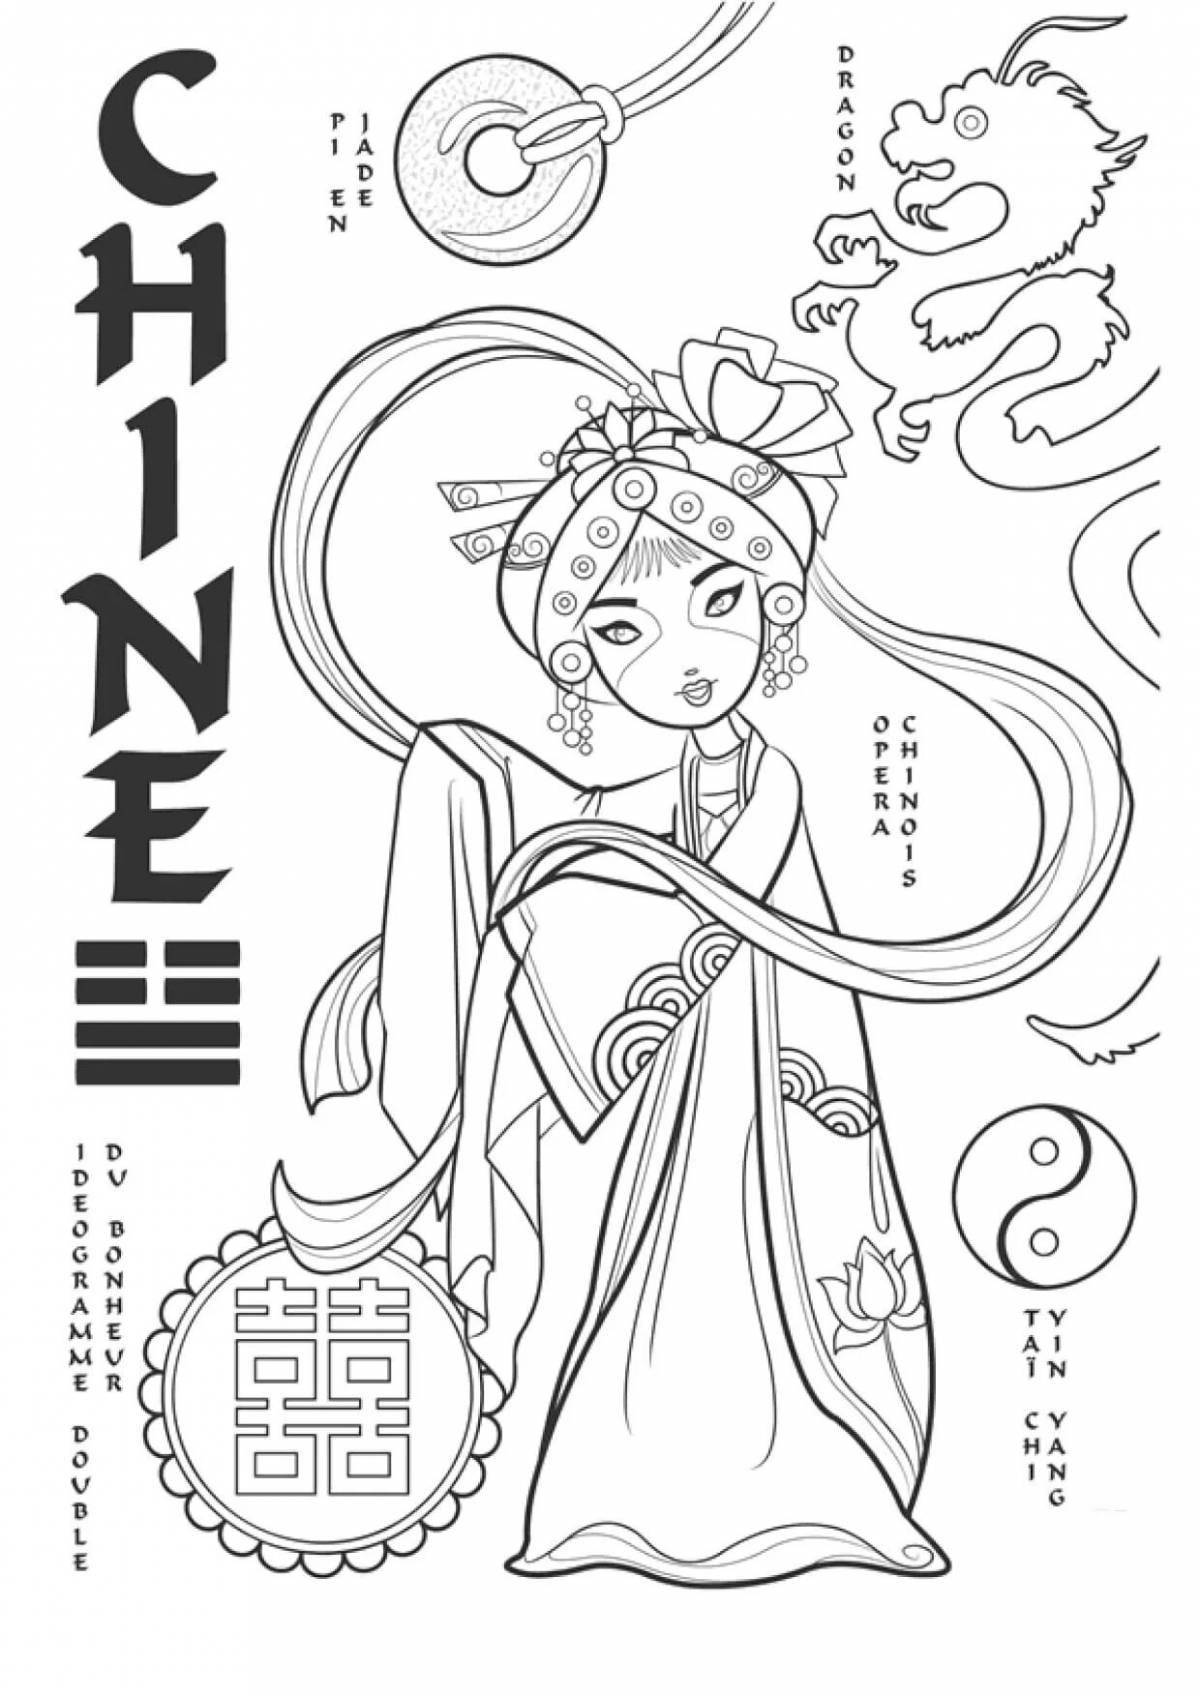 Exciting Chinese coloring book